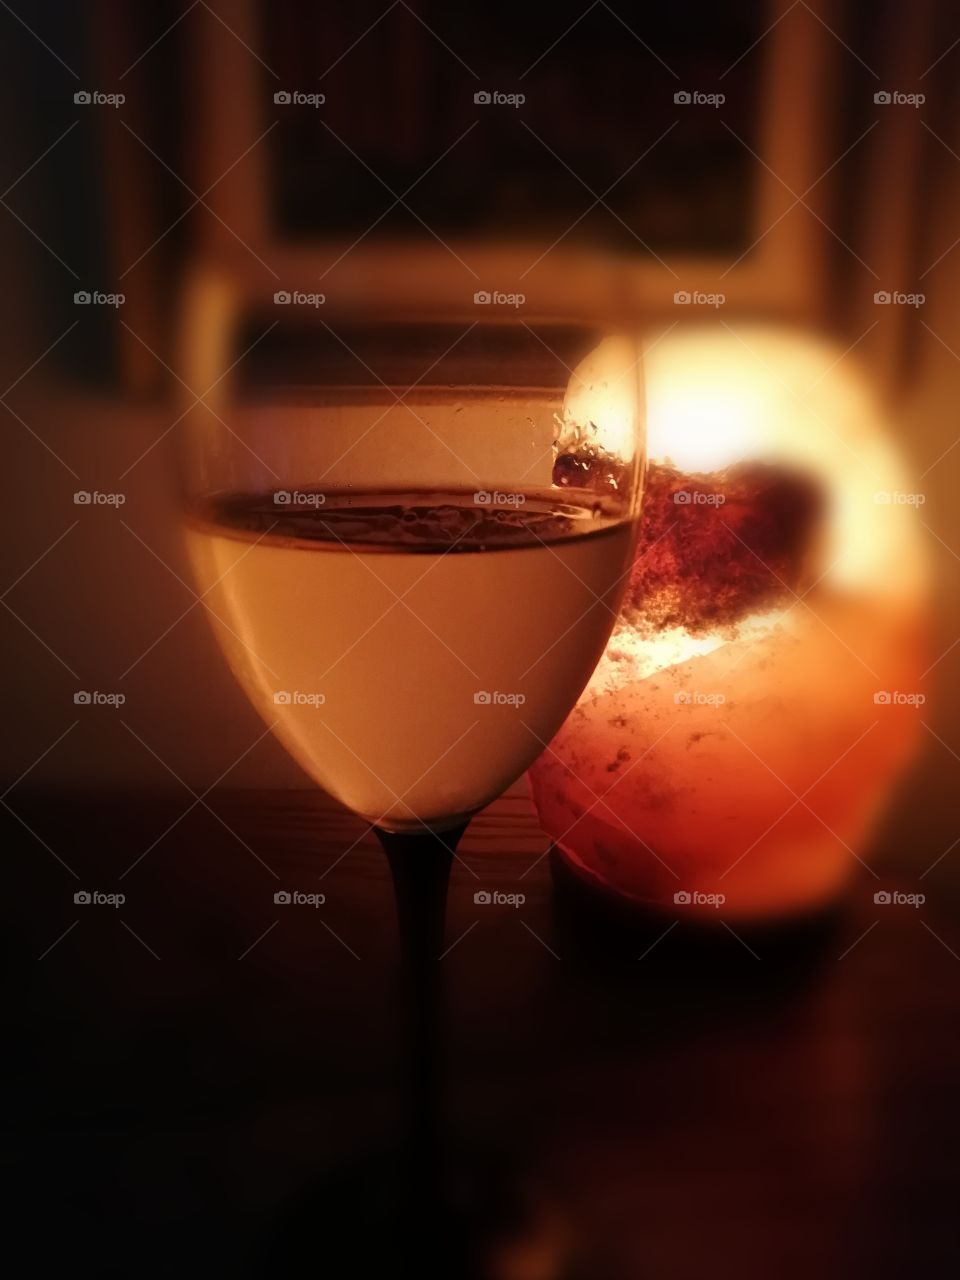 A see-through wine glass with a black leg standing on the brown table in a dark room. The surface of the glass is wet outside because of the cold drink.Some clear drops become visible.Behind is an orange light,made of salt and a painting on the wall